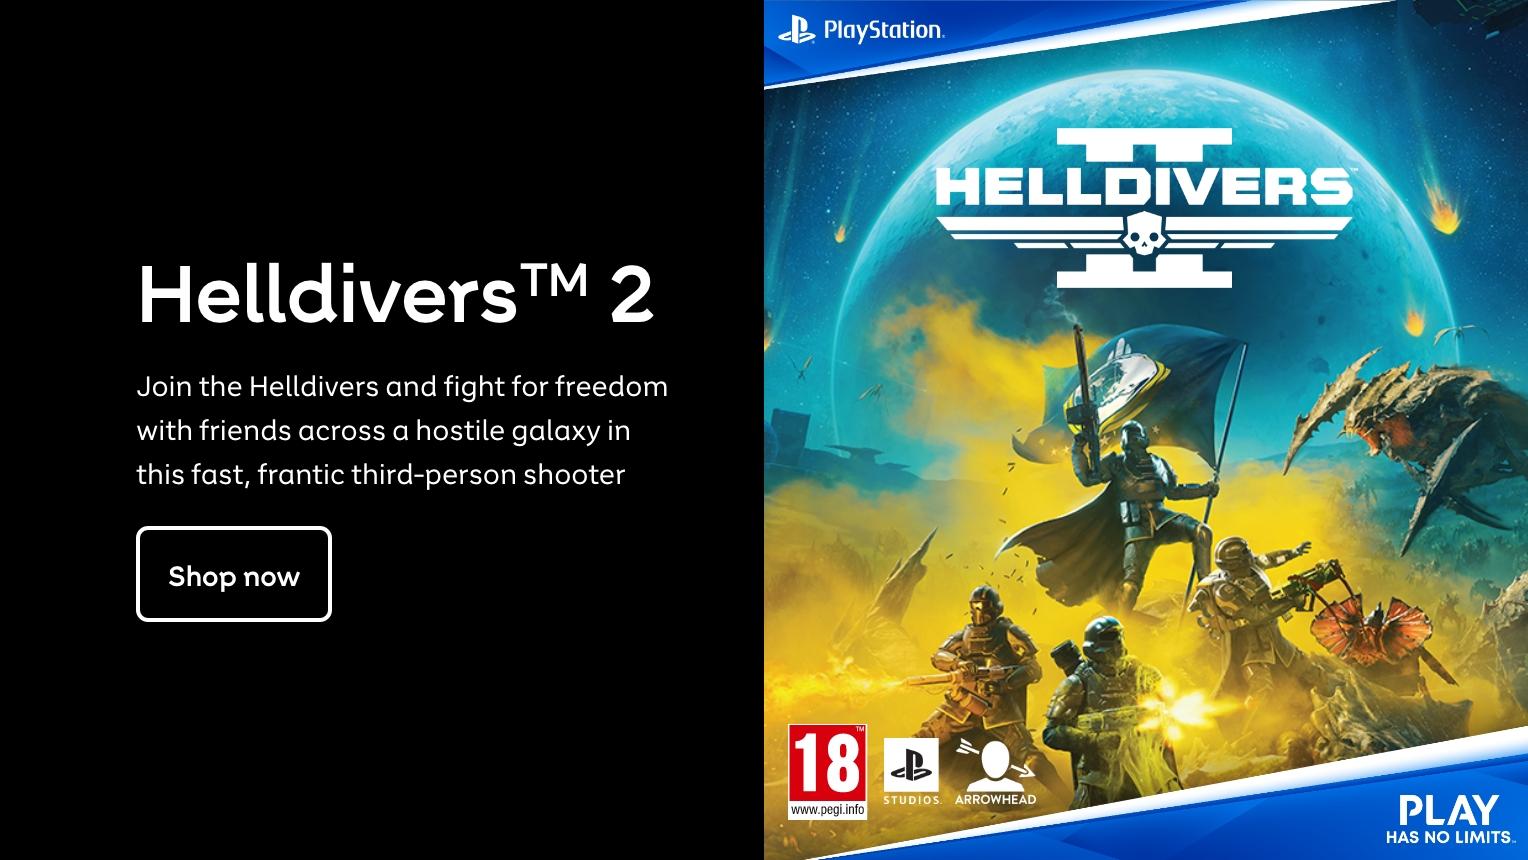 Hell Divers 2. Play your part in a Galactic War in this epic third-person shooter. Shop now.